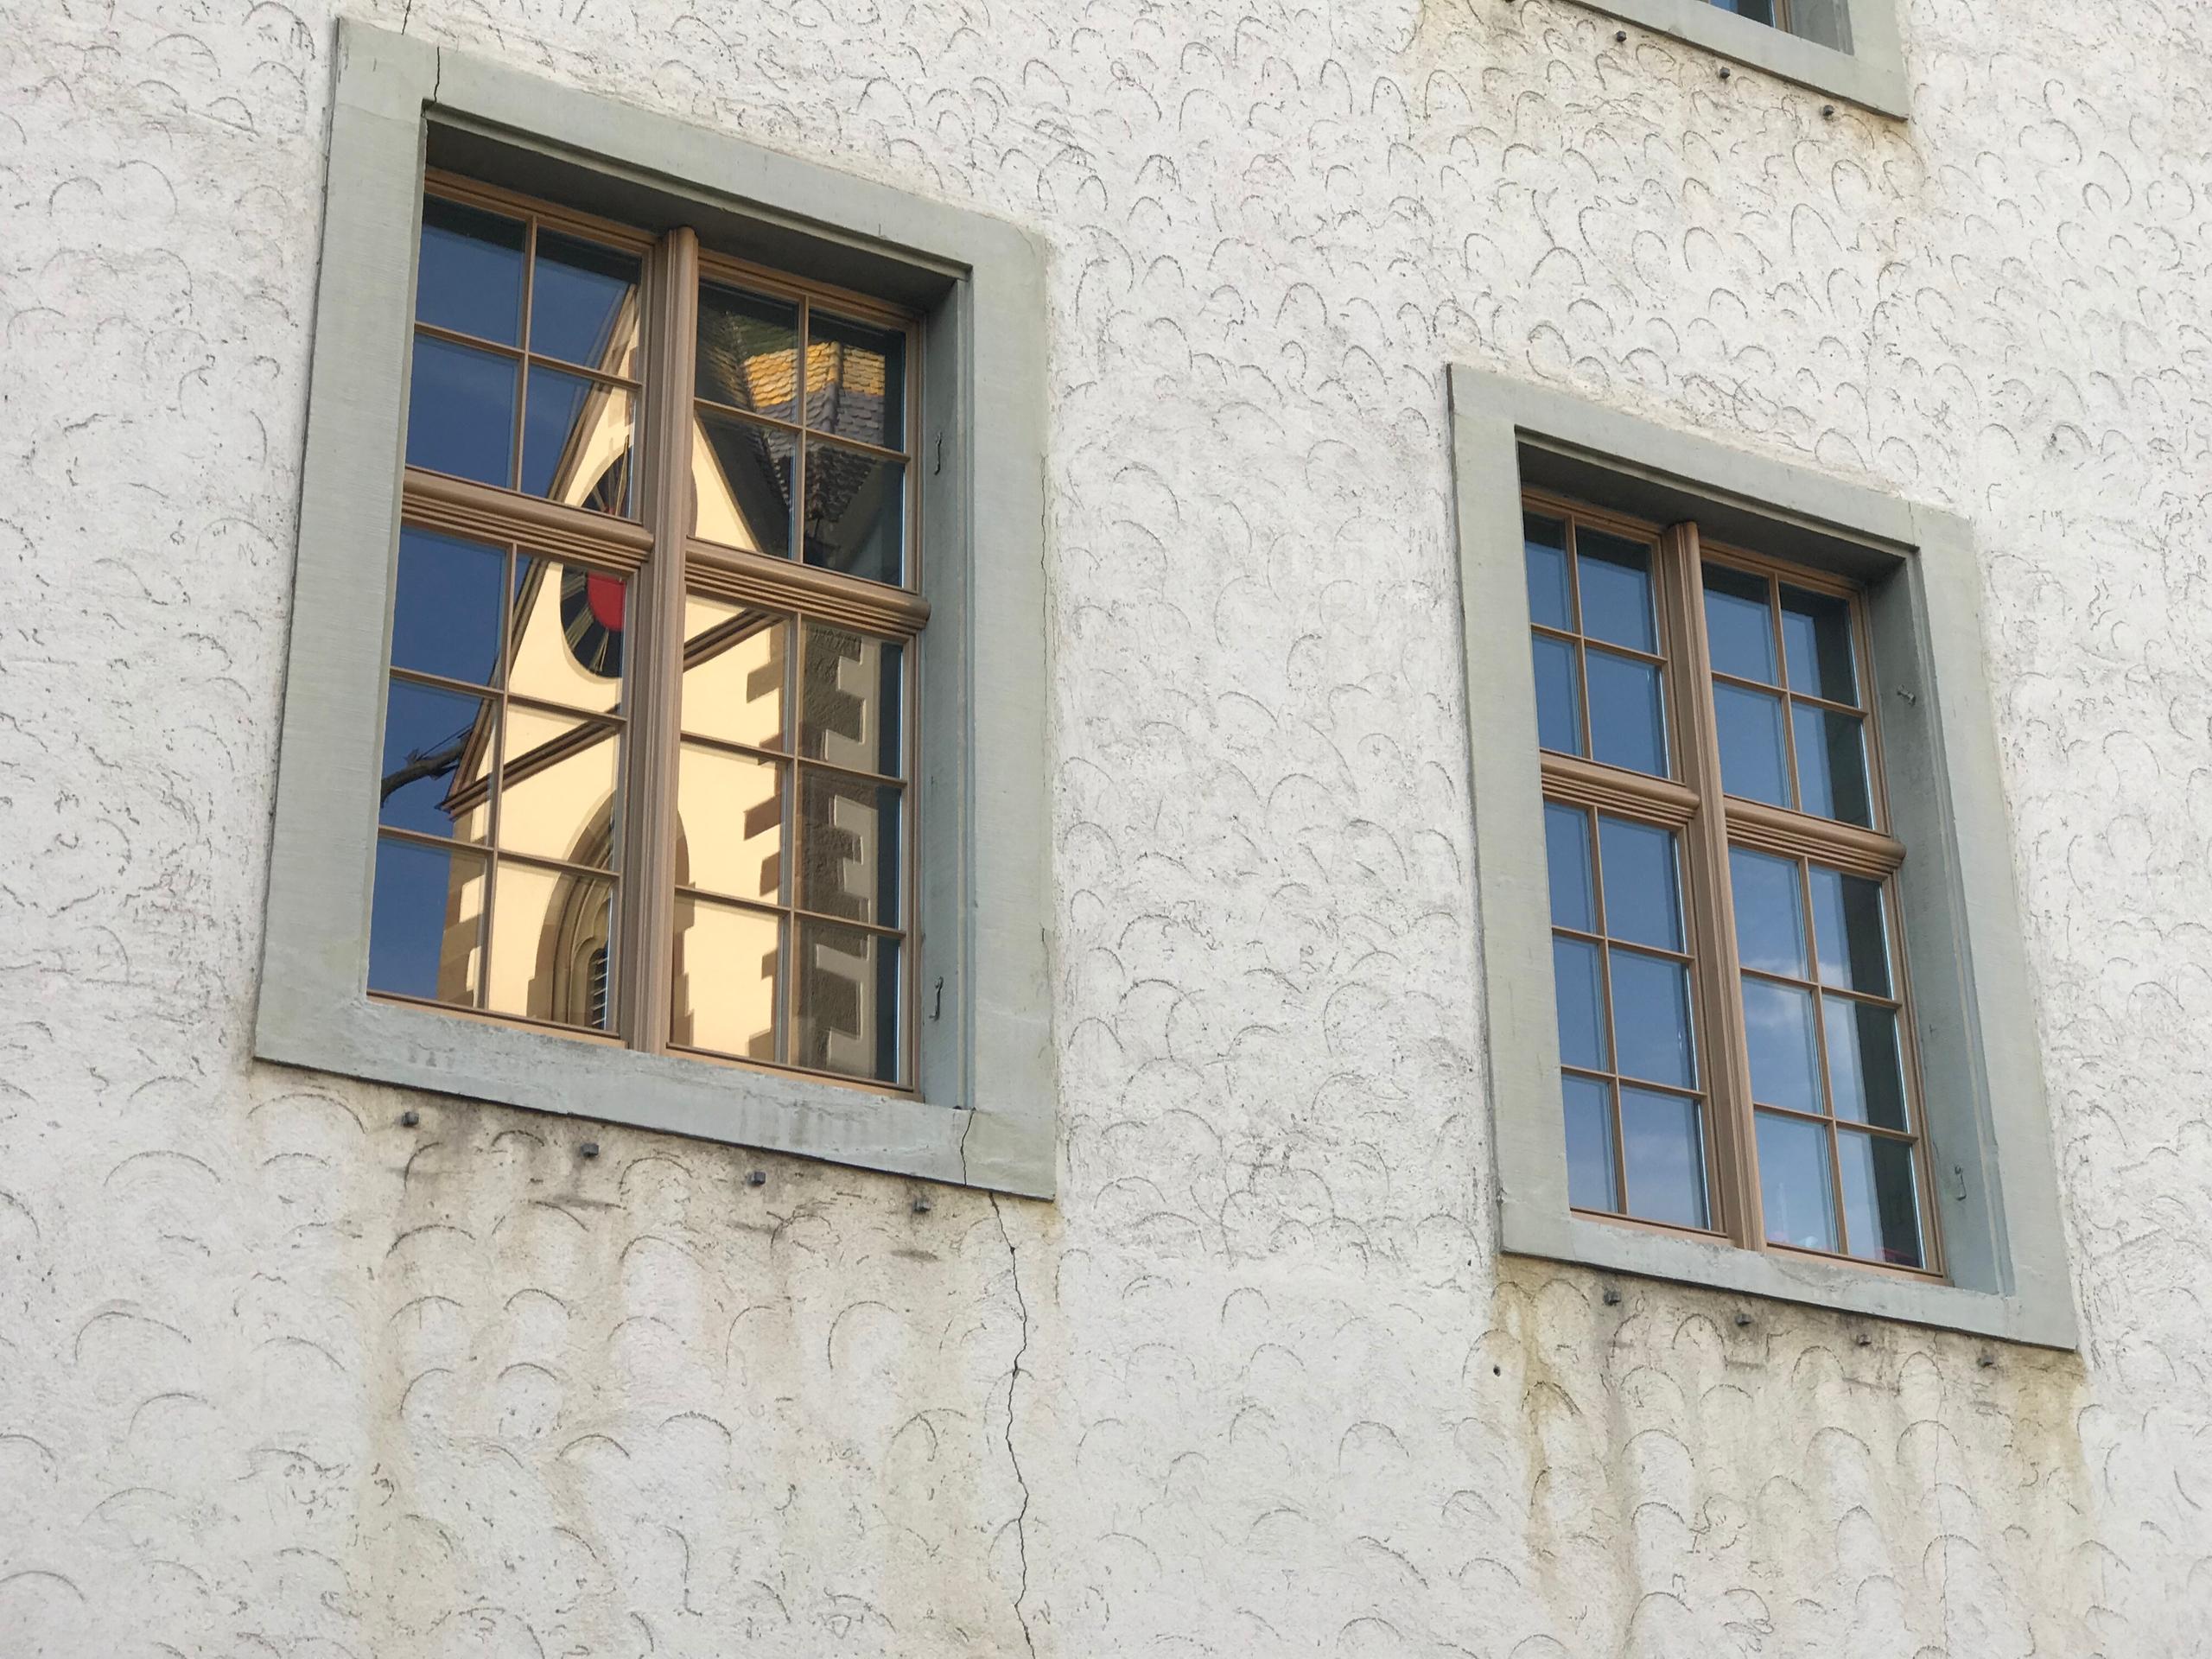 The church tower is reflected in the windows of the building housing the museum